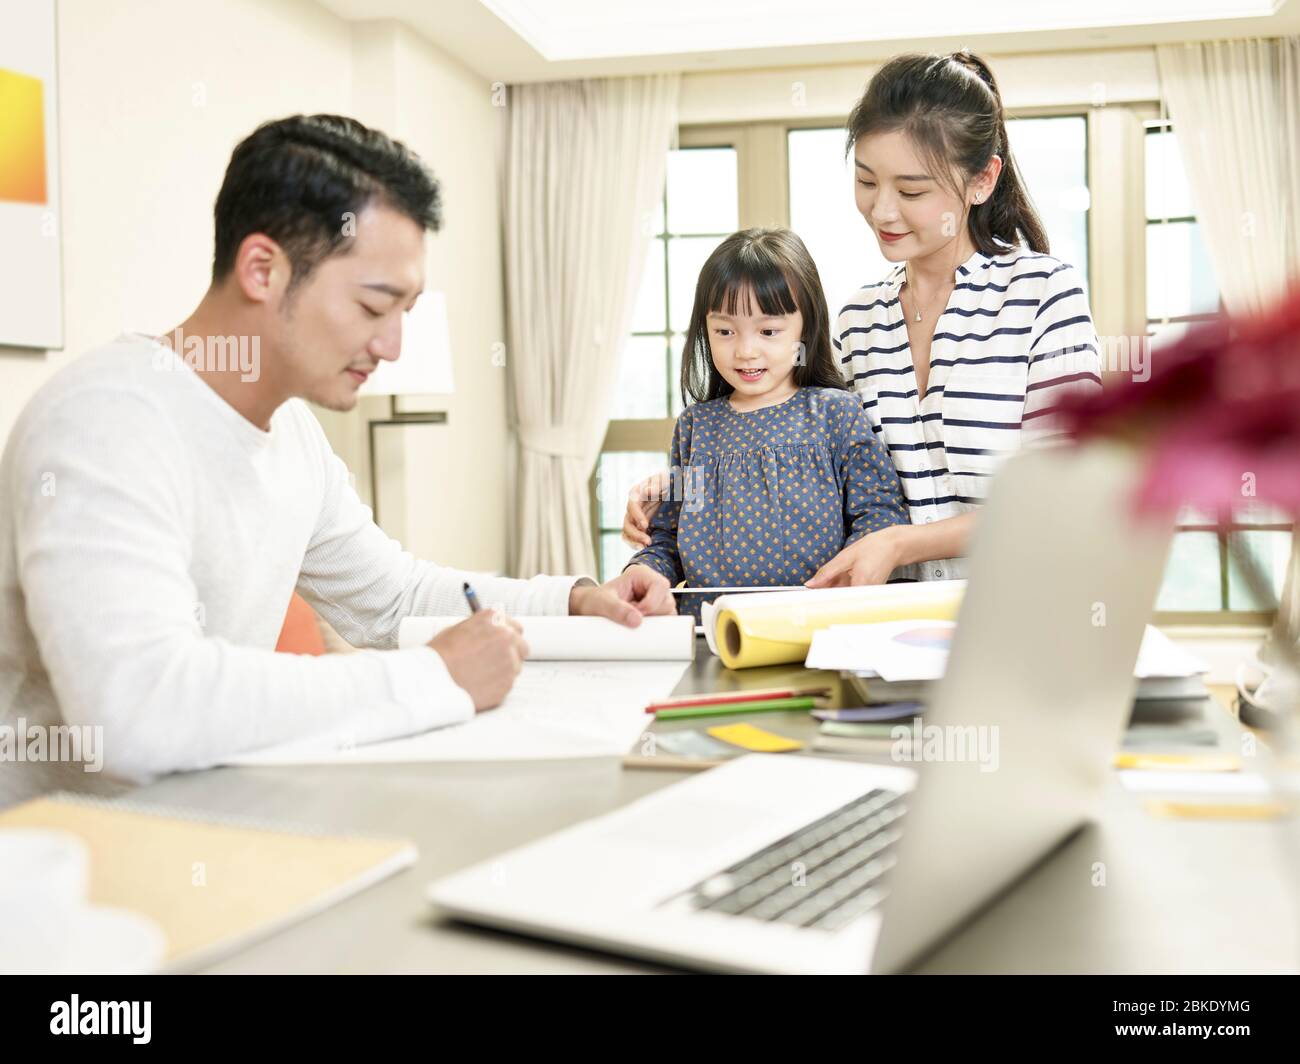 young asian mother and daughter watching father drawing a design while working from home (artwork in background digitally altered) Stock Photo